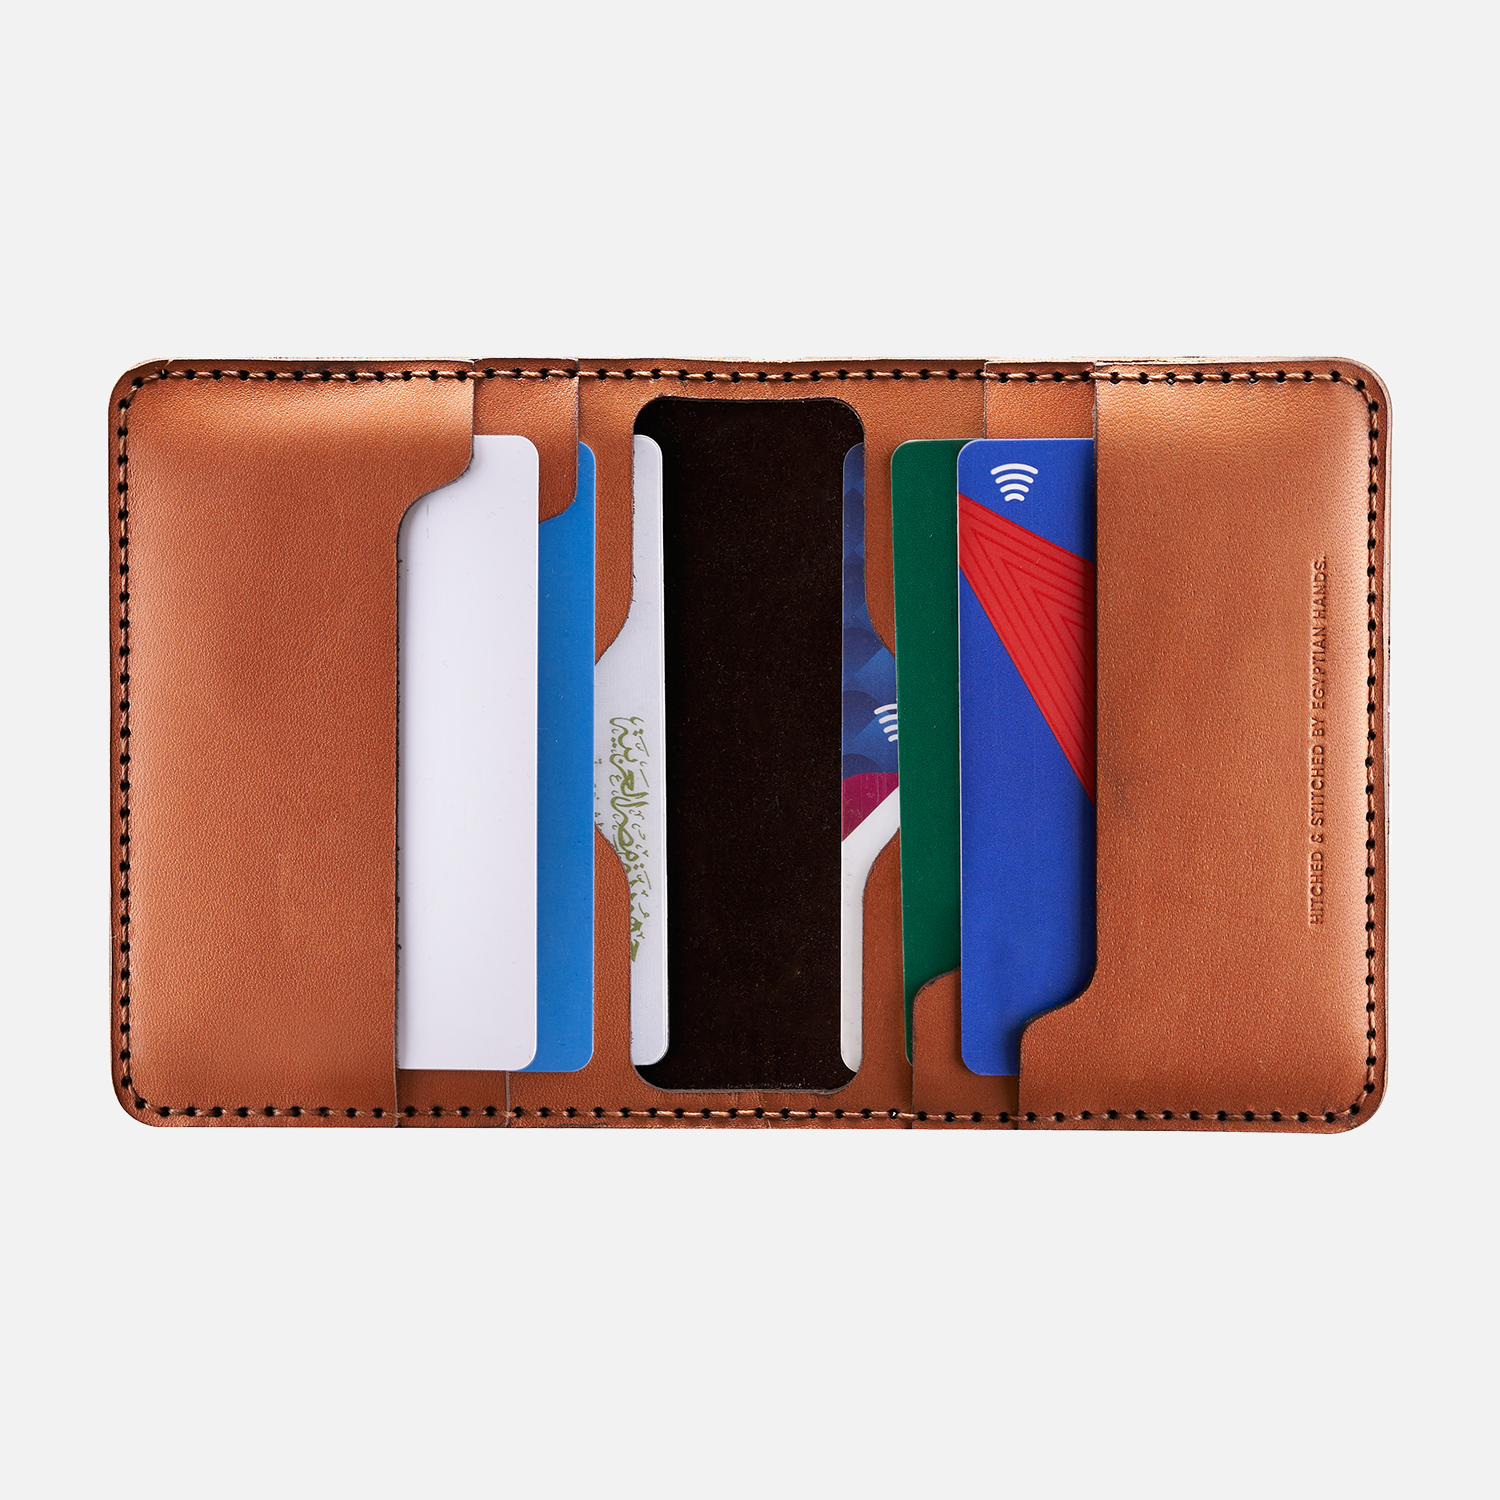 Leather bifold wallet with various credit cards isolated on white background.